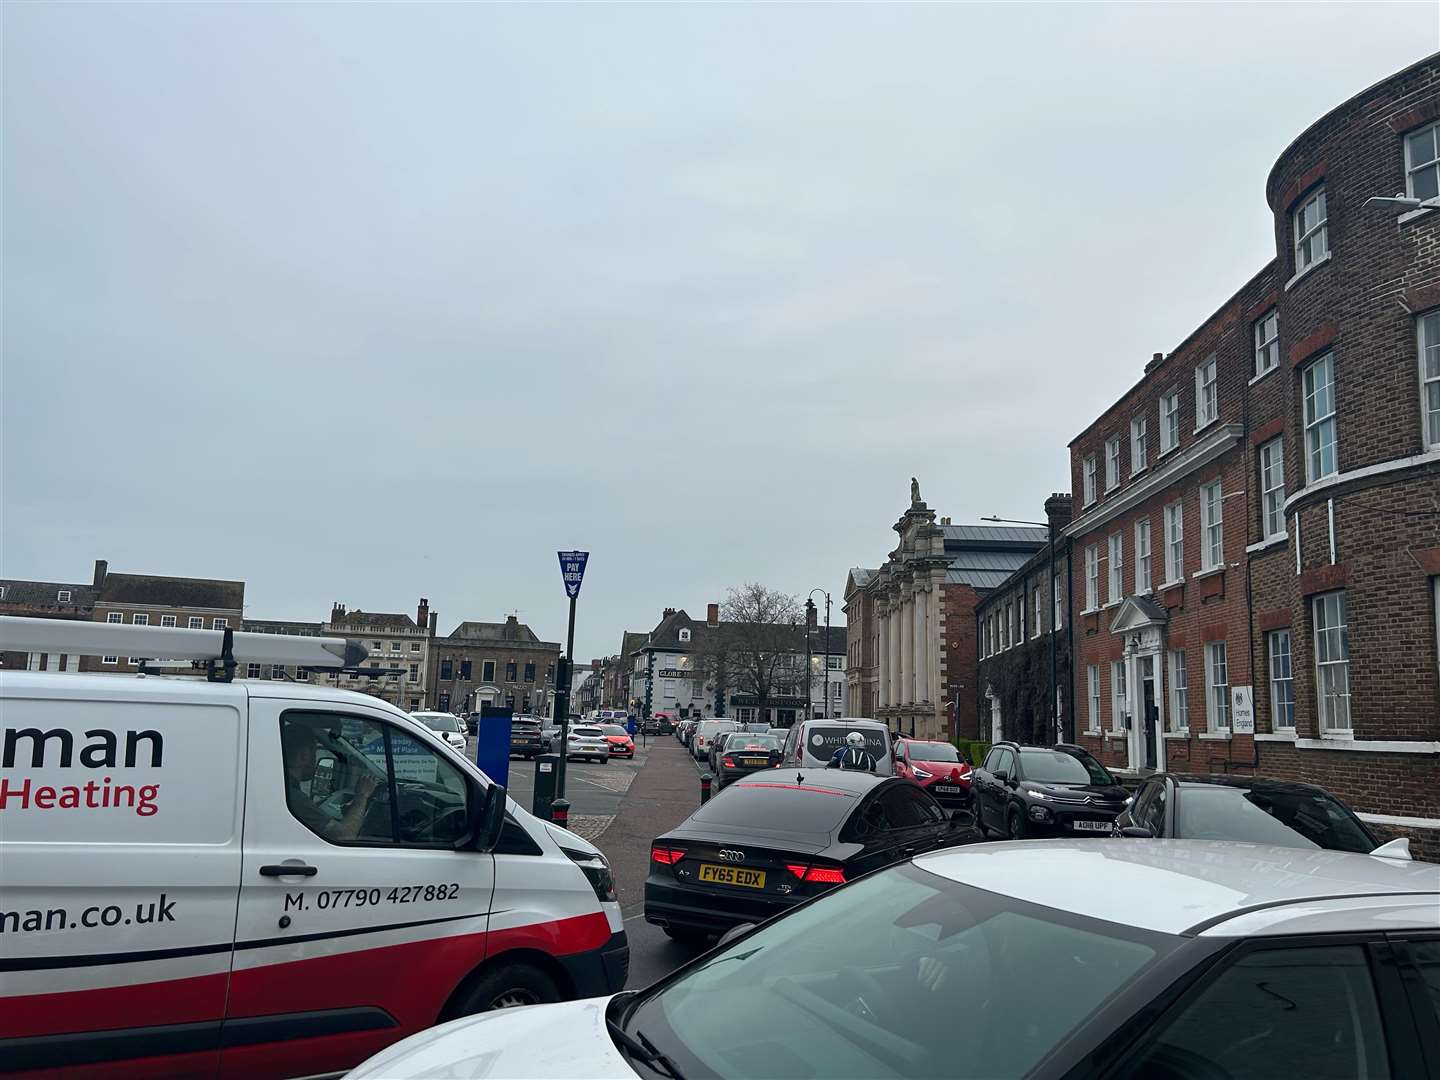 Traffic was gridlocked in the Tuesday Market Place in the hours following the incident